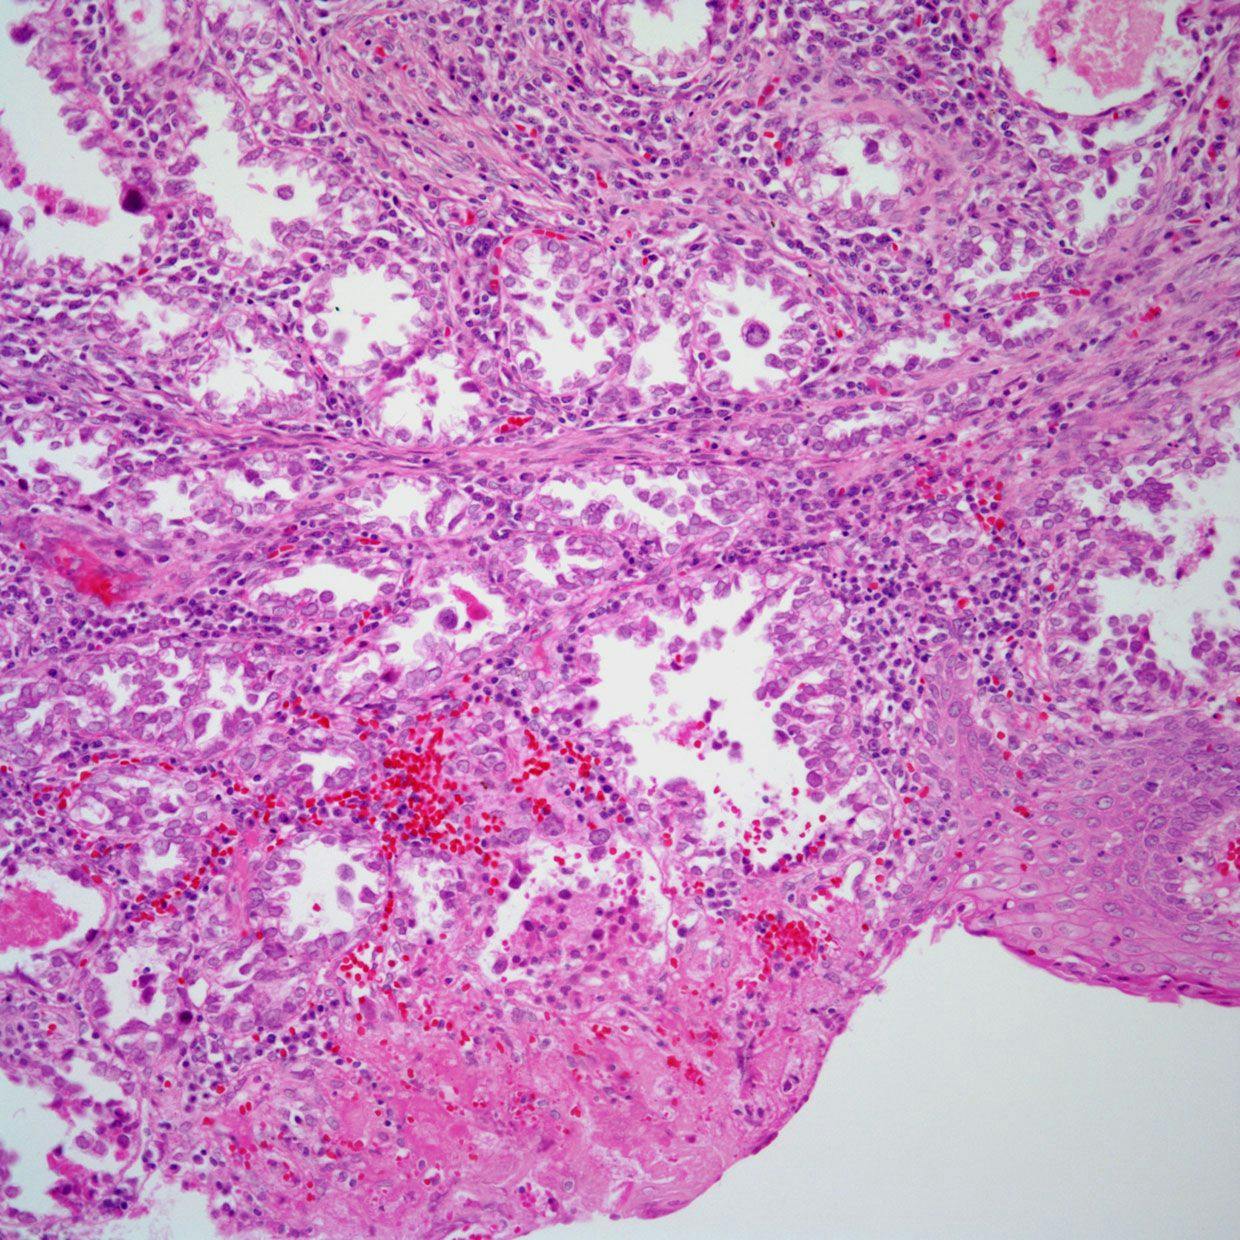 Vaginal Mass in 54-Year-Old Patient